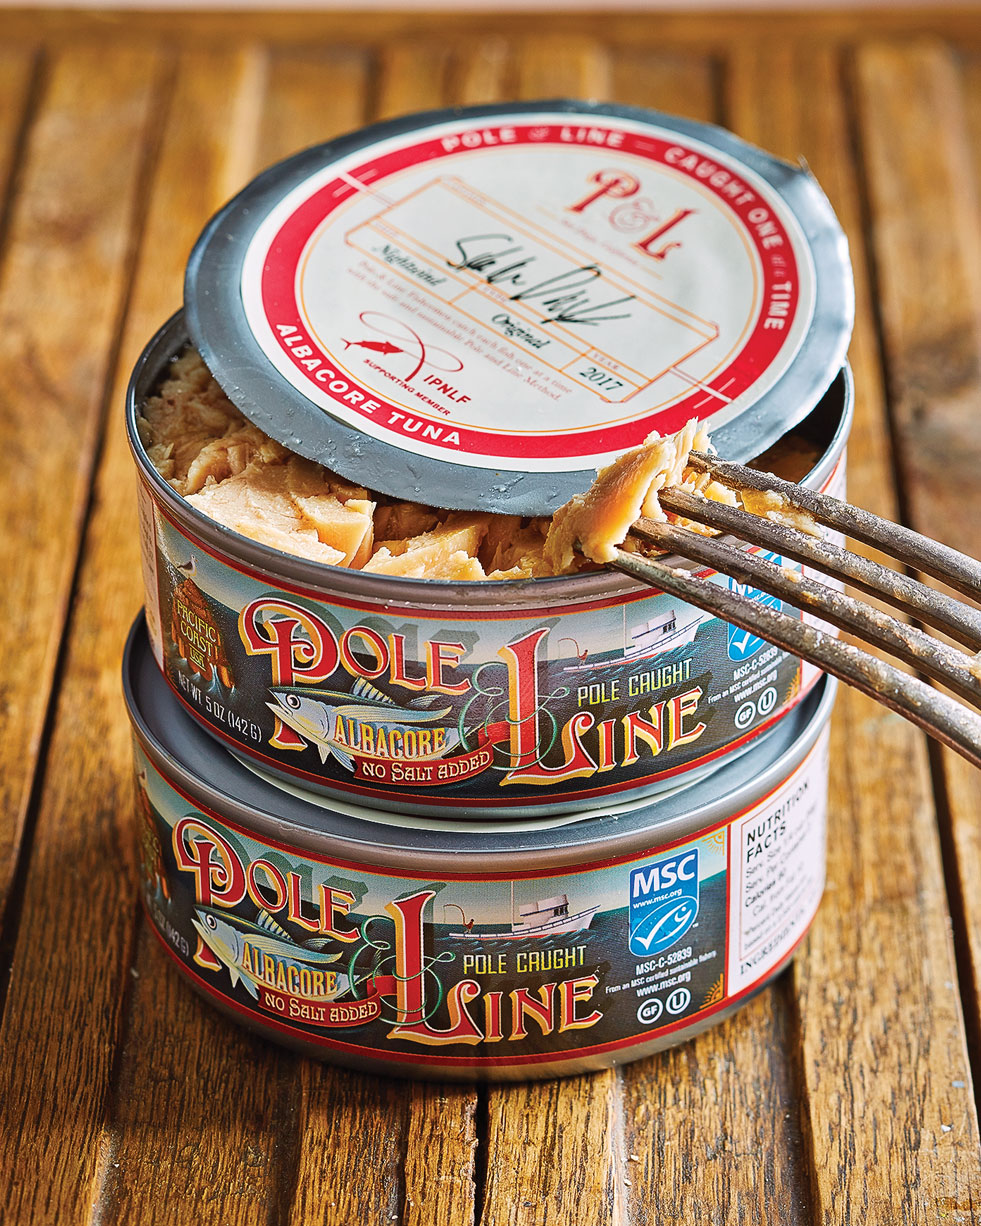 Why should you buy line-caught and pole-caught tuna?